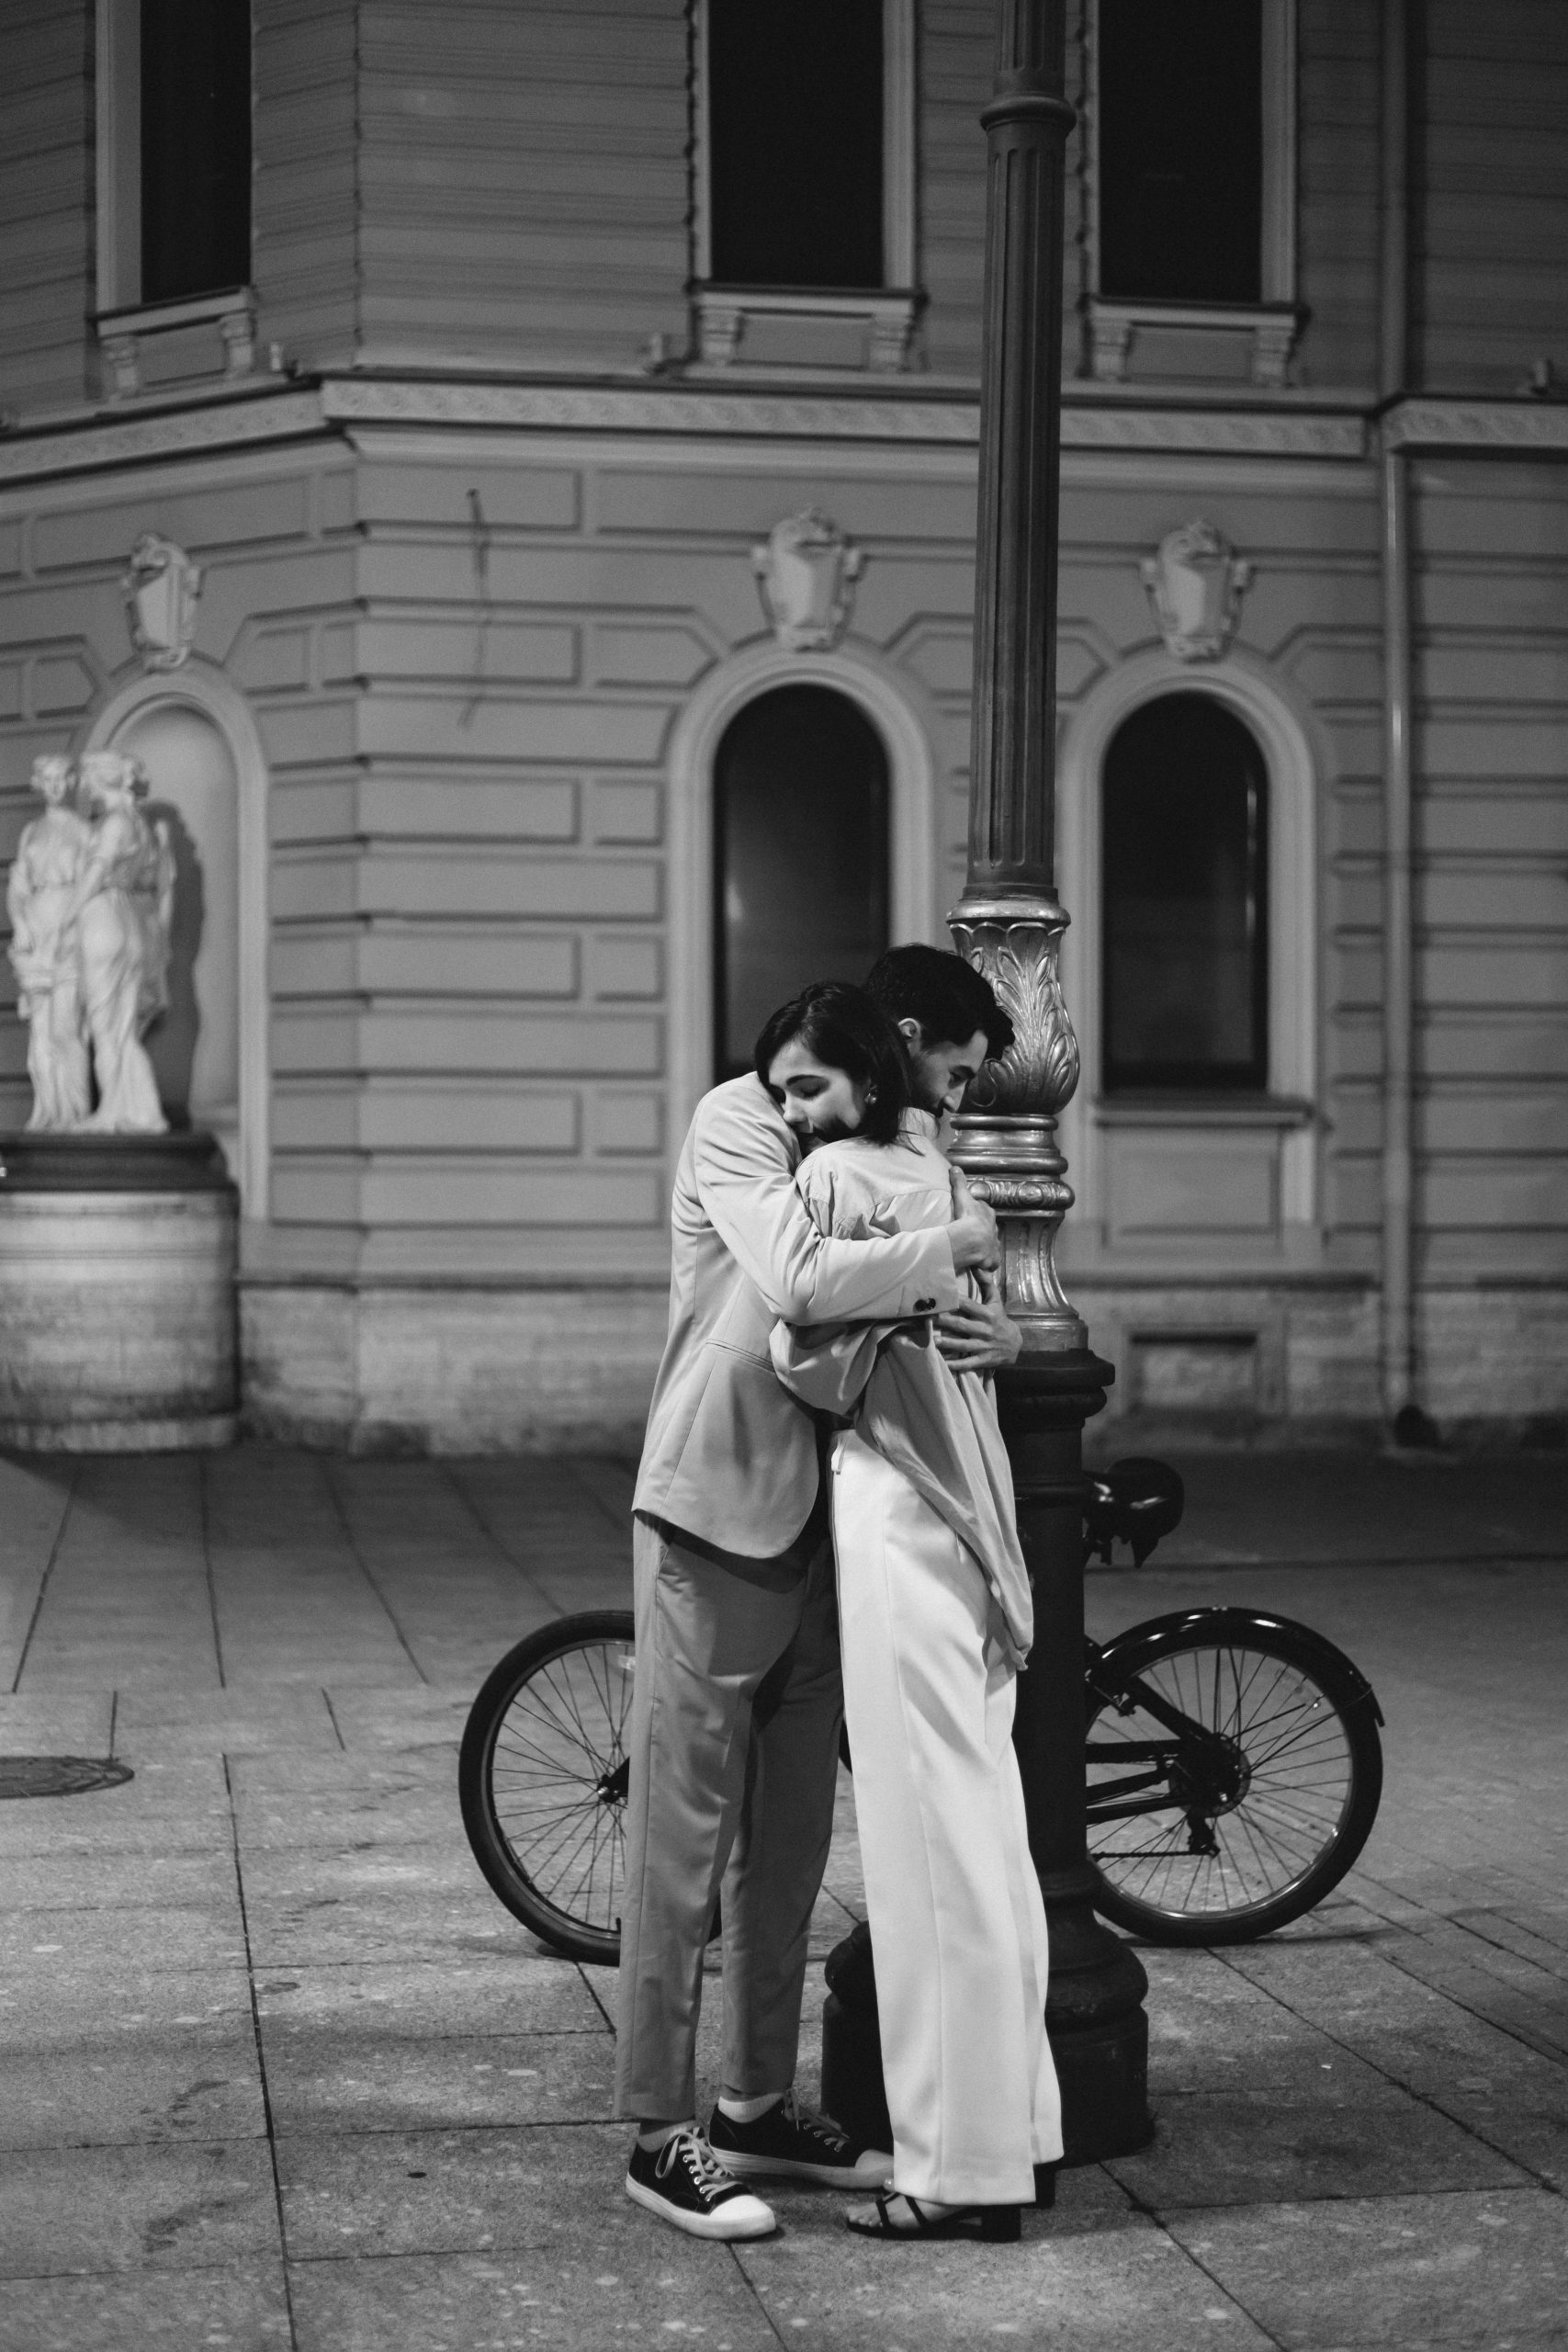 Man and a woman hugging on the street.